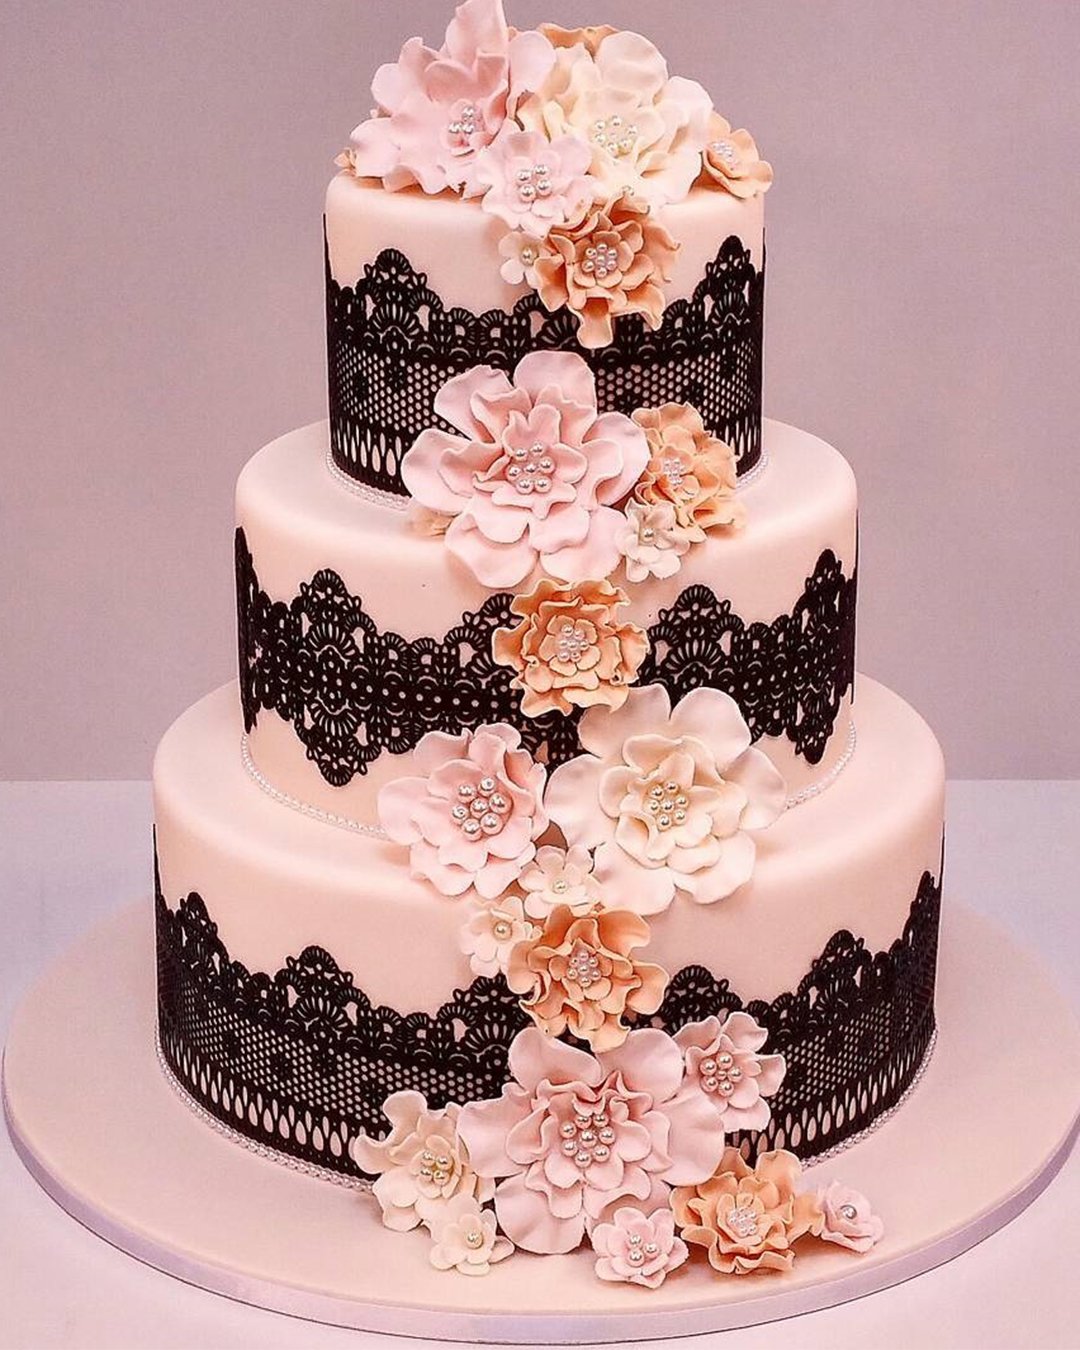 black and white wedding cakes minimalistic black and white cakesblack and white wedding cakes wedding cakes with flowers